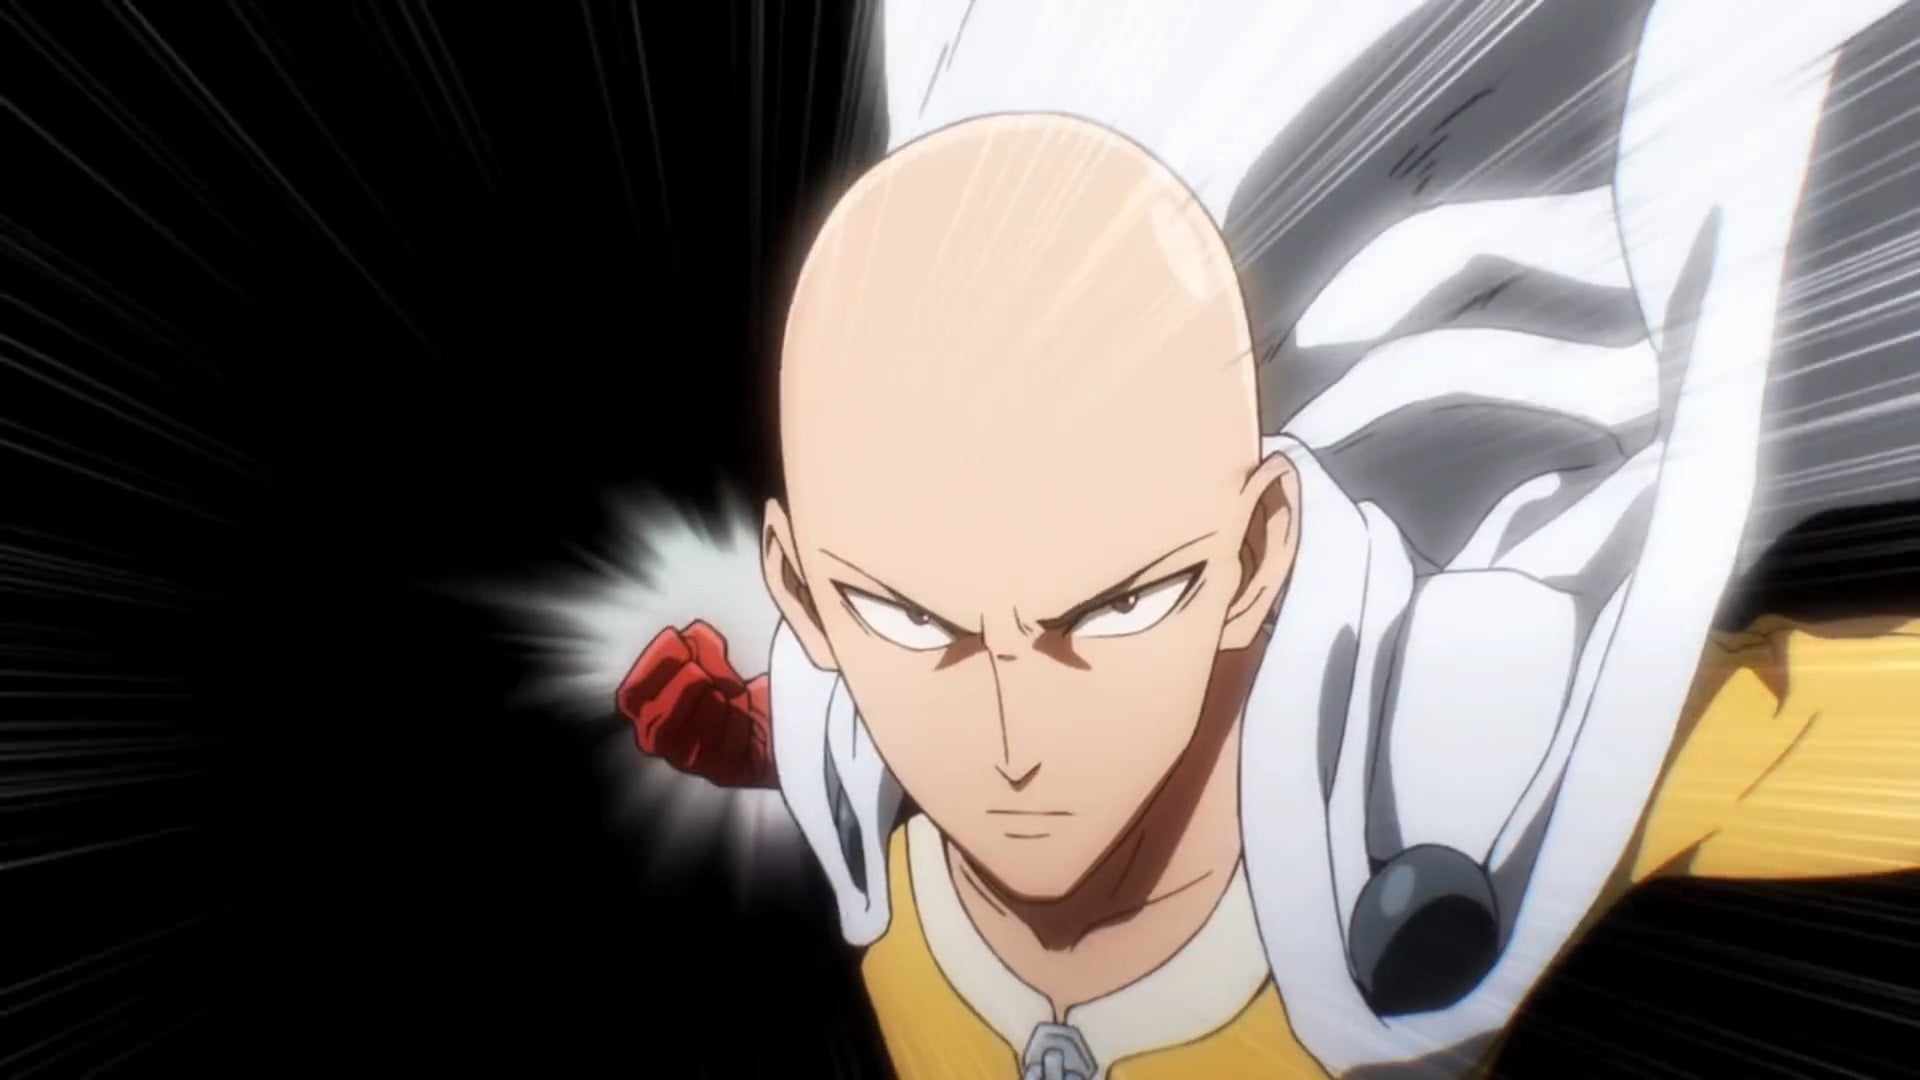 Background One Punch Man Wallpaper Discover more Anime Character  Japanese One Punch Man Superhero wallpaper https  One punch man One  punch Man wallpaper